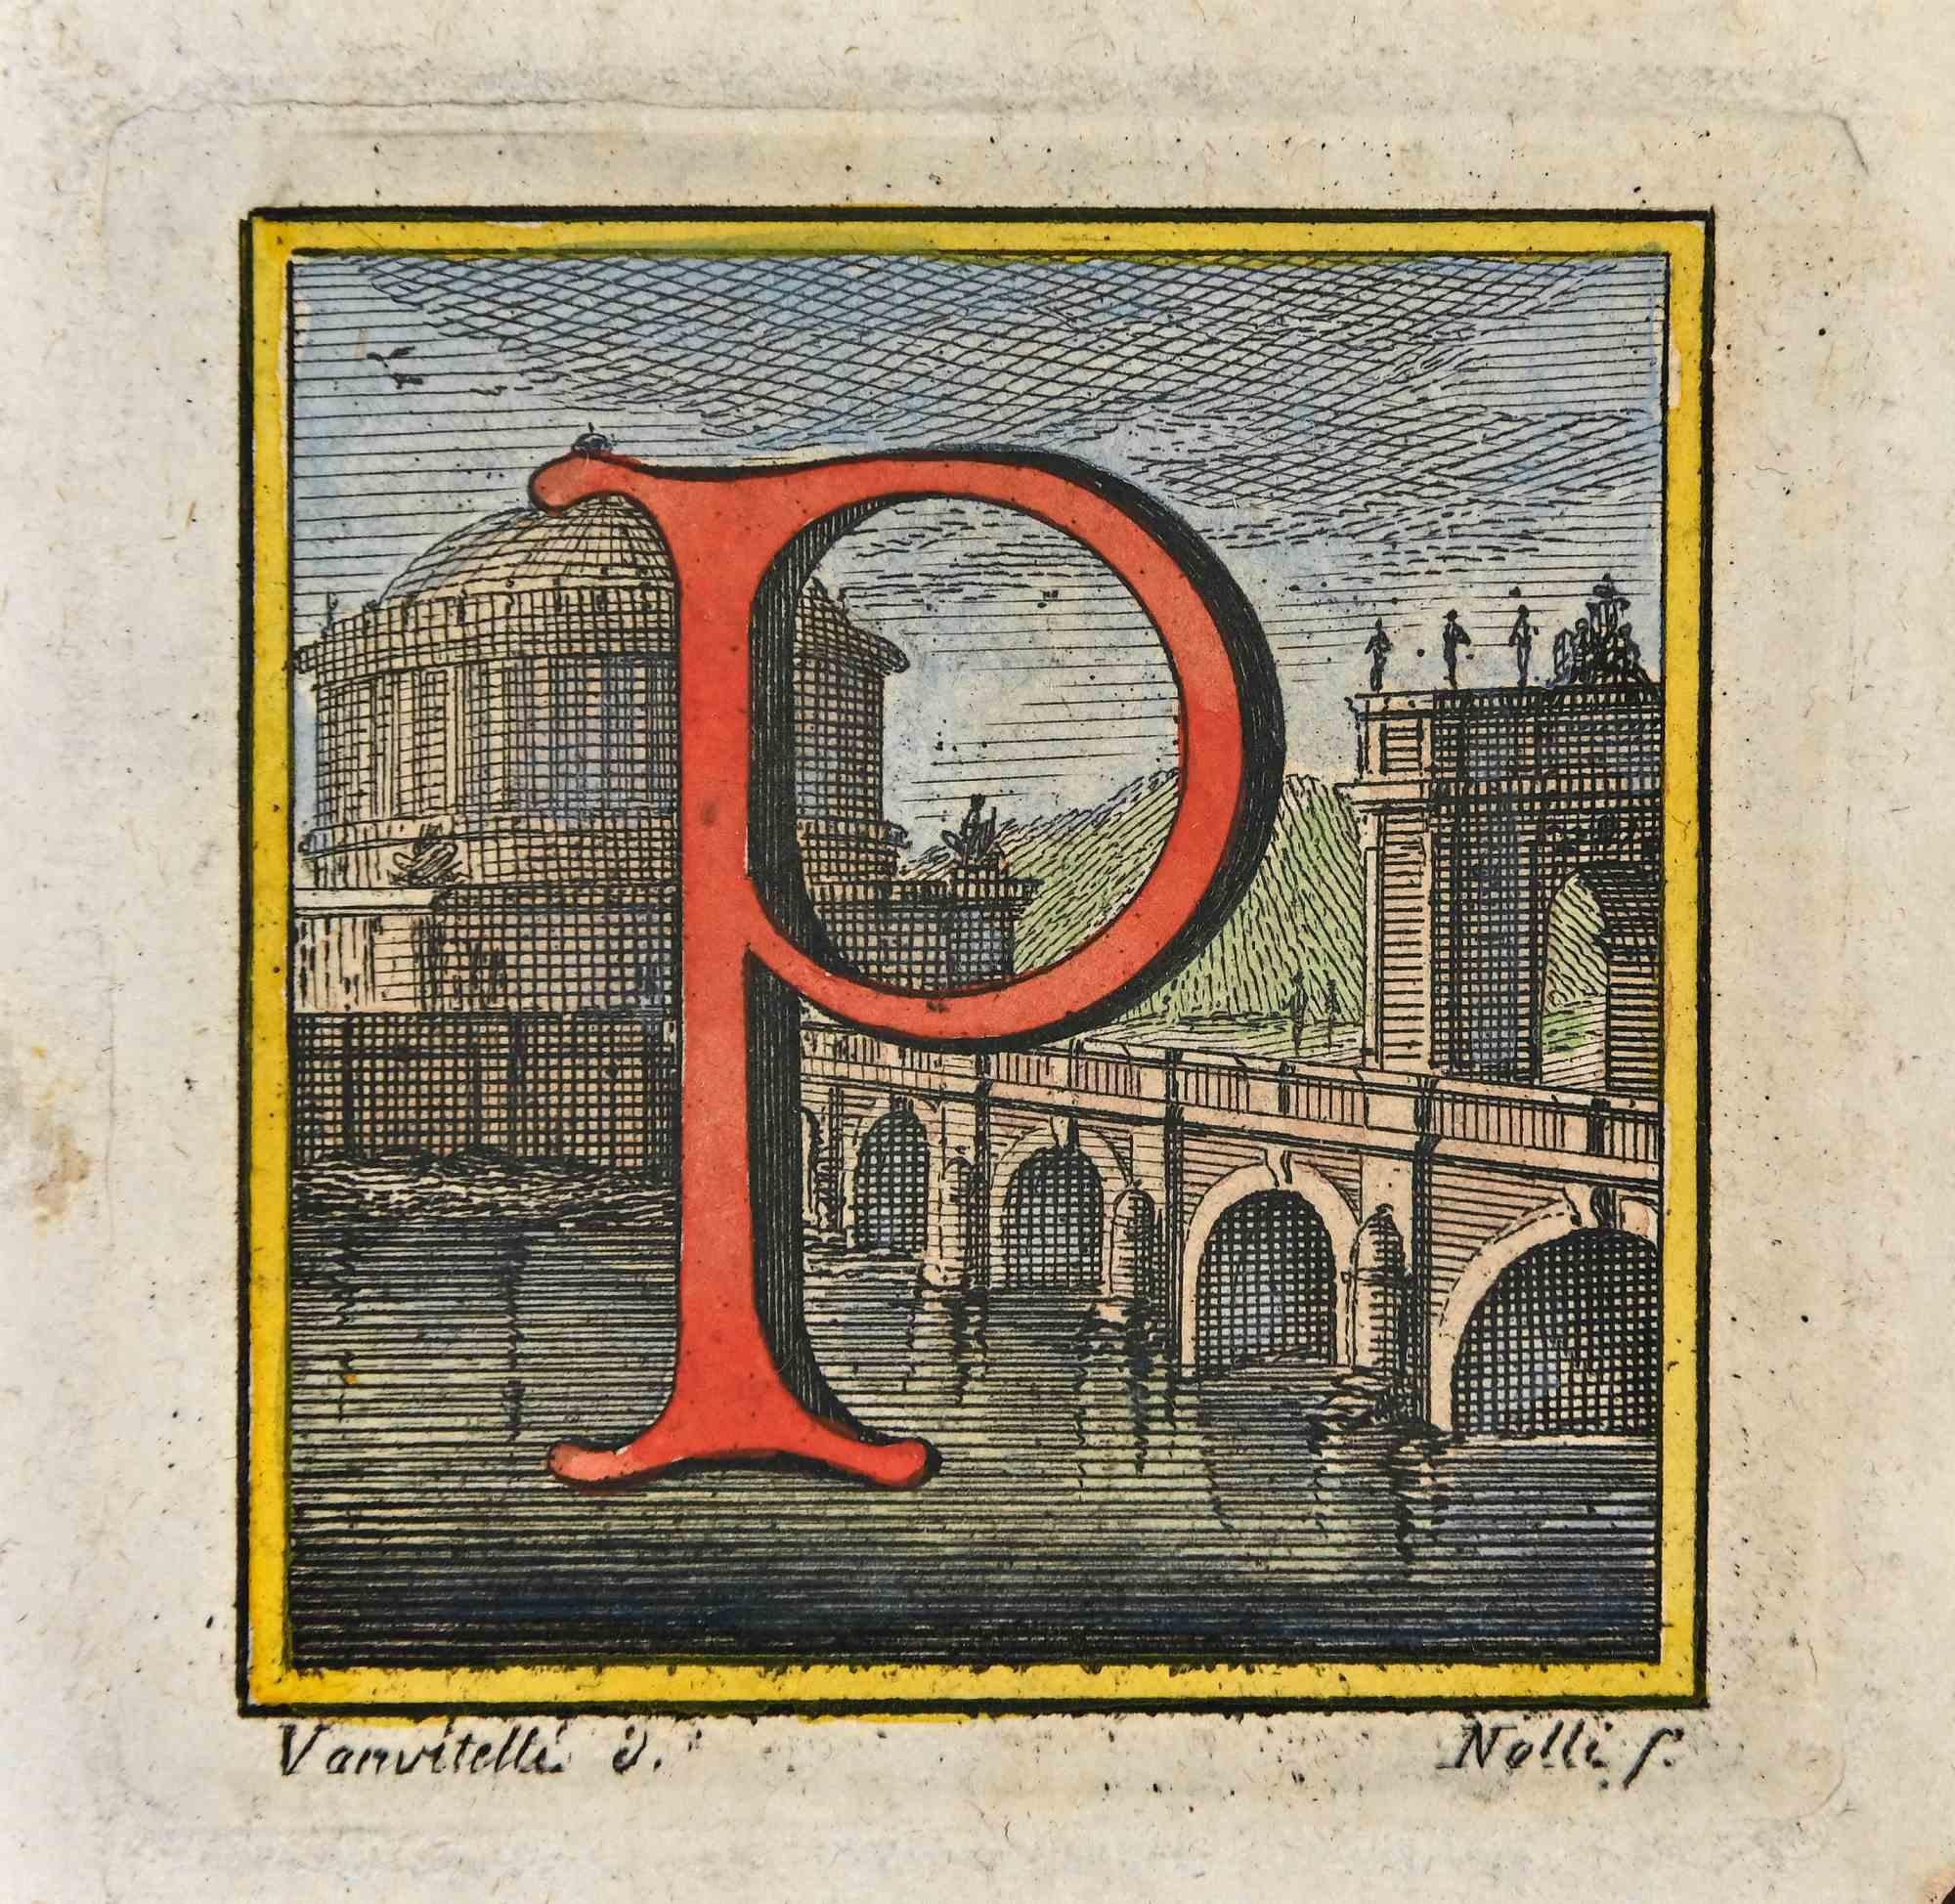 18th letter of the alphabet